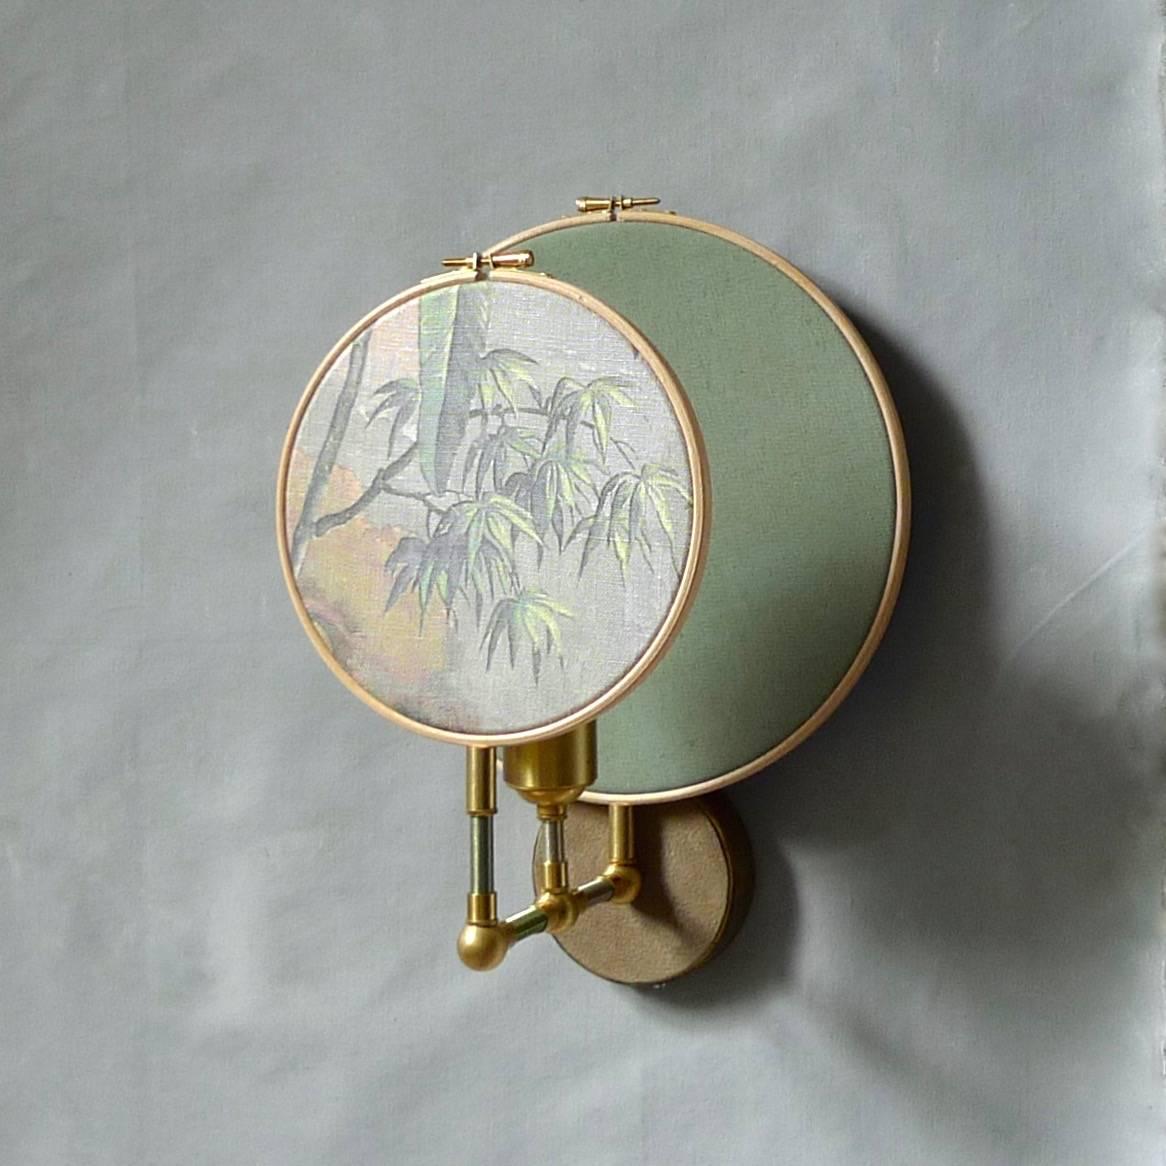 Circle Blue Grey Wall Sconce by Sander Bottinga 
Handmade in brass, leather, wood, and hand-printed and painted linen.
A dimmer is inlaid with leather. Also possible without a dimmer.
Dimensions: H 35 x W 27 x D 23 cm. 

The design artwork is